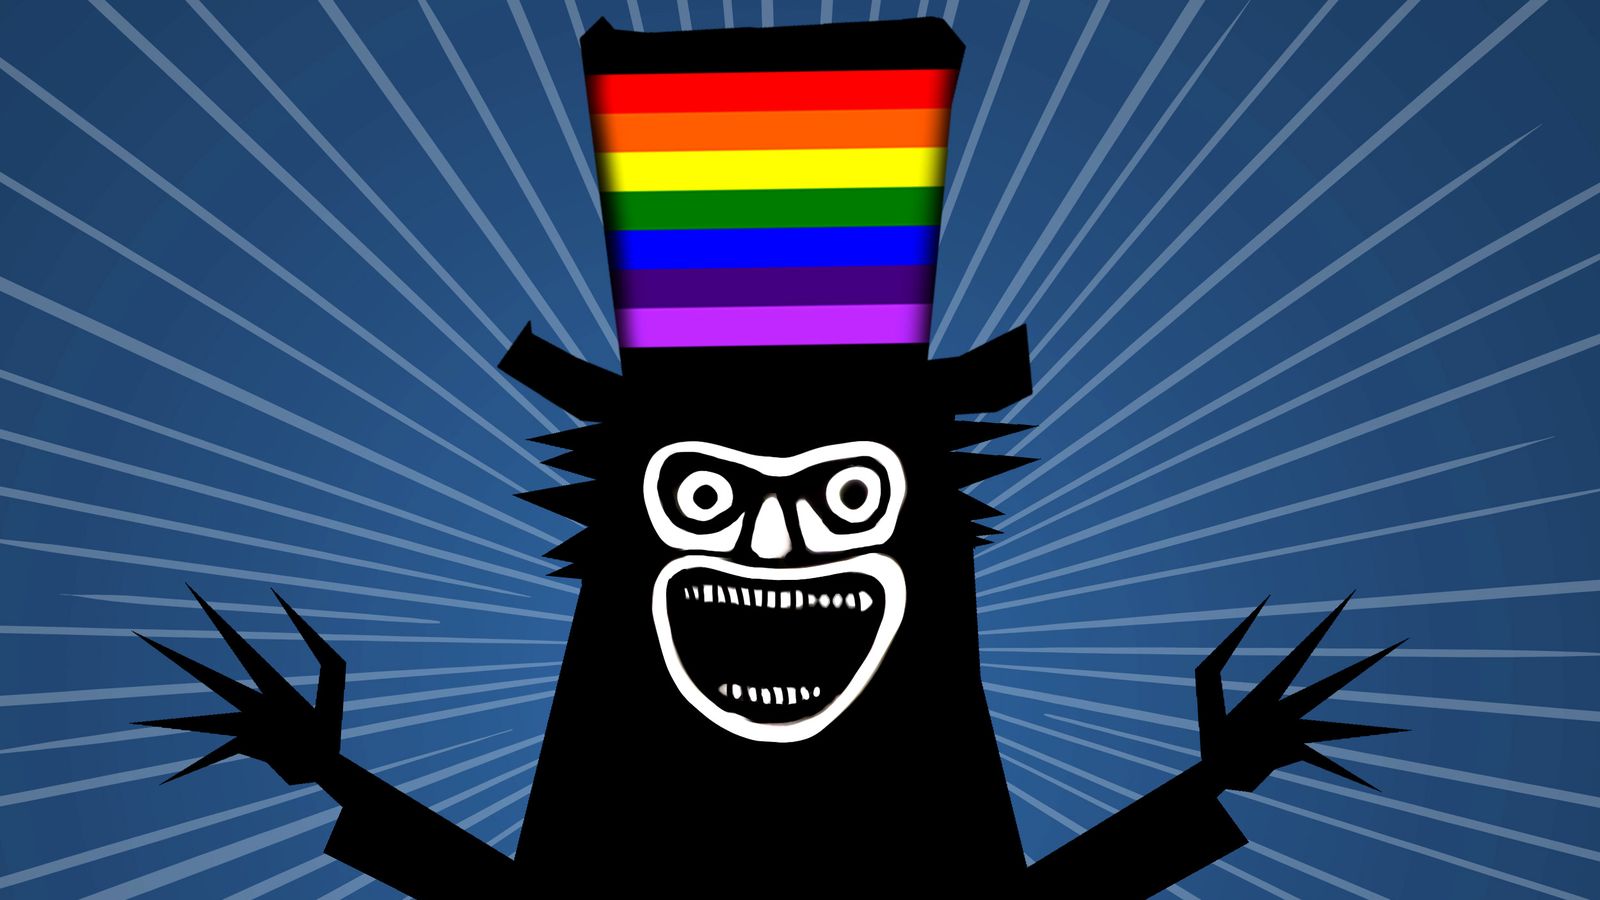 How the Babadook became the LGBTQ icon we didn't know we needed